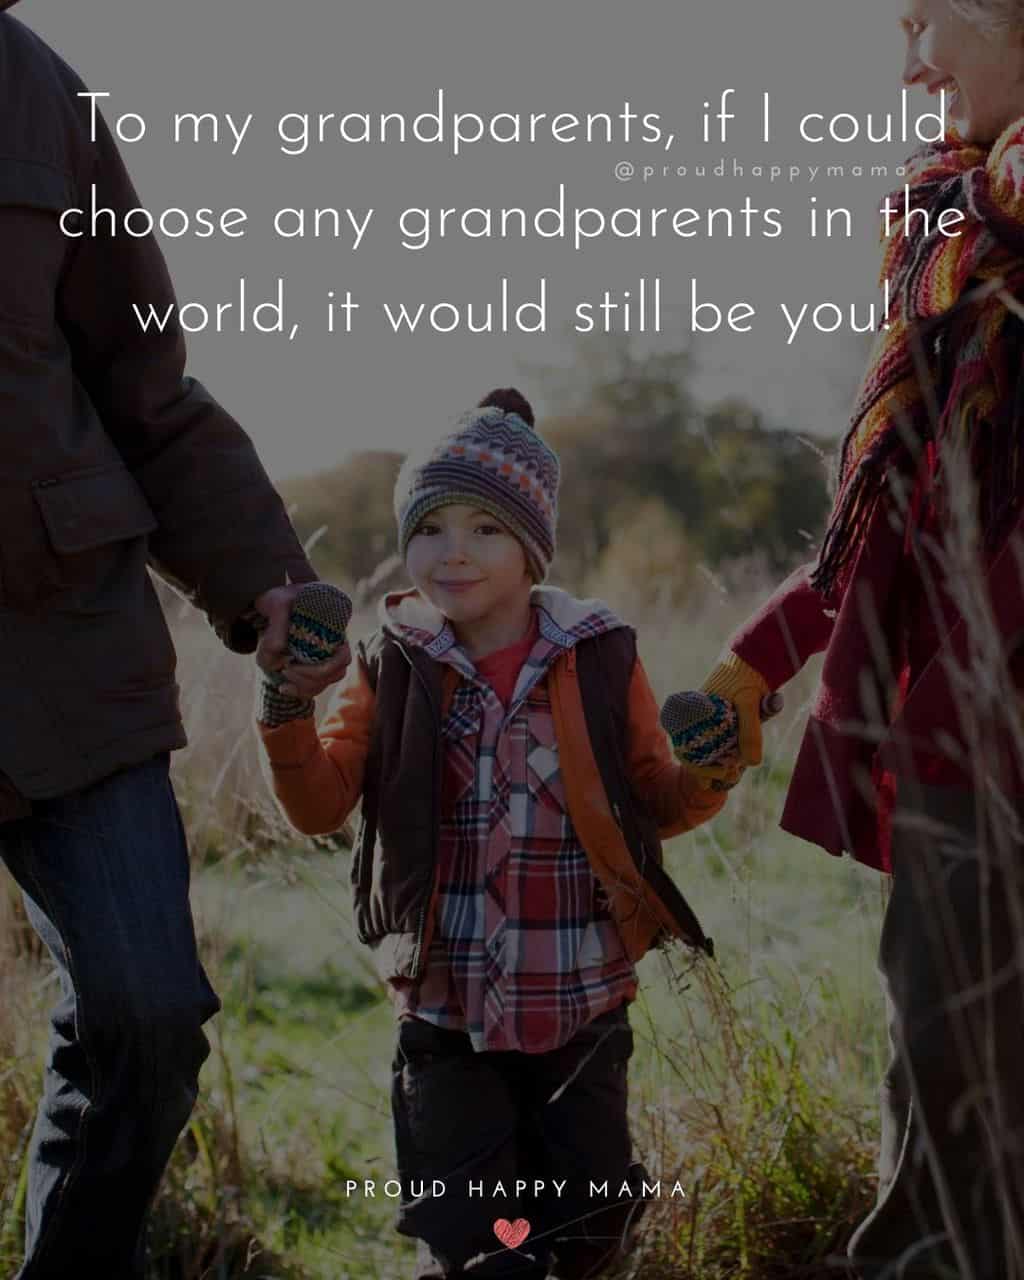 Grandparent Quotes – To my grandparents, ‘If I could choose any grandparents in the world, it would still be you!’